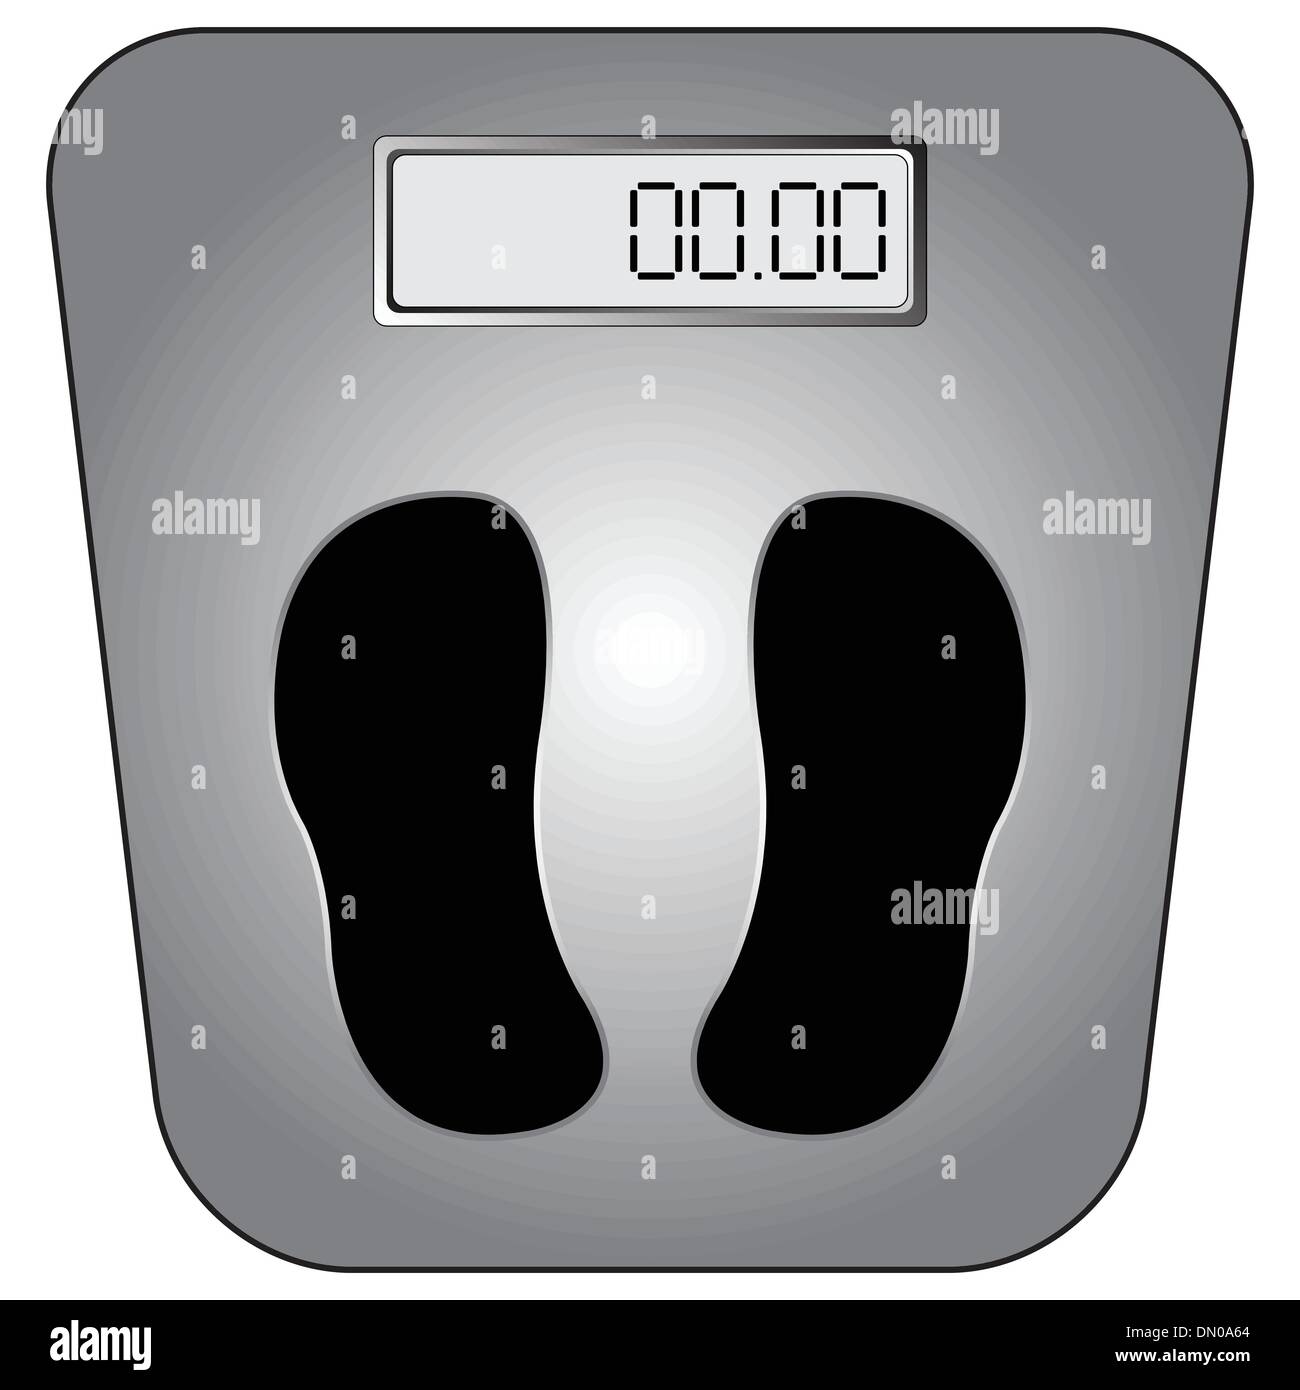 Pink bathroom weight scale icon isolated. Stock Vector